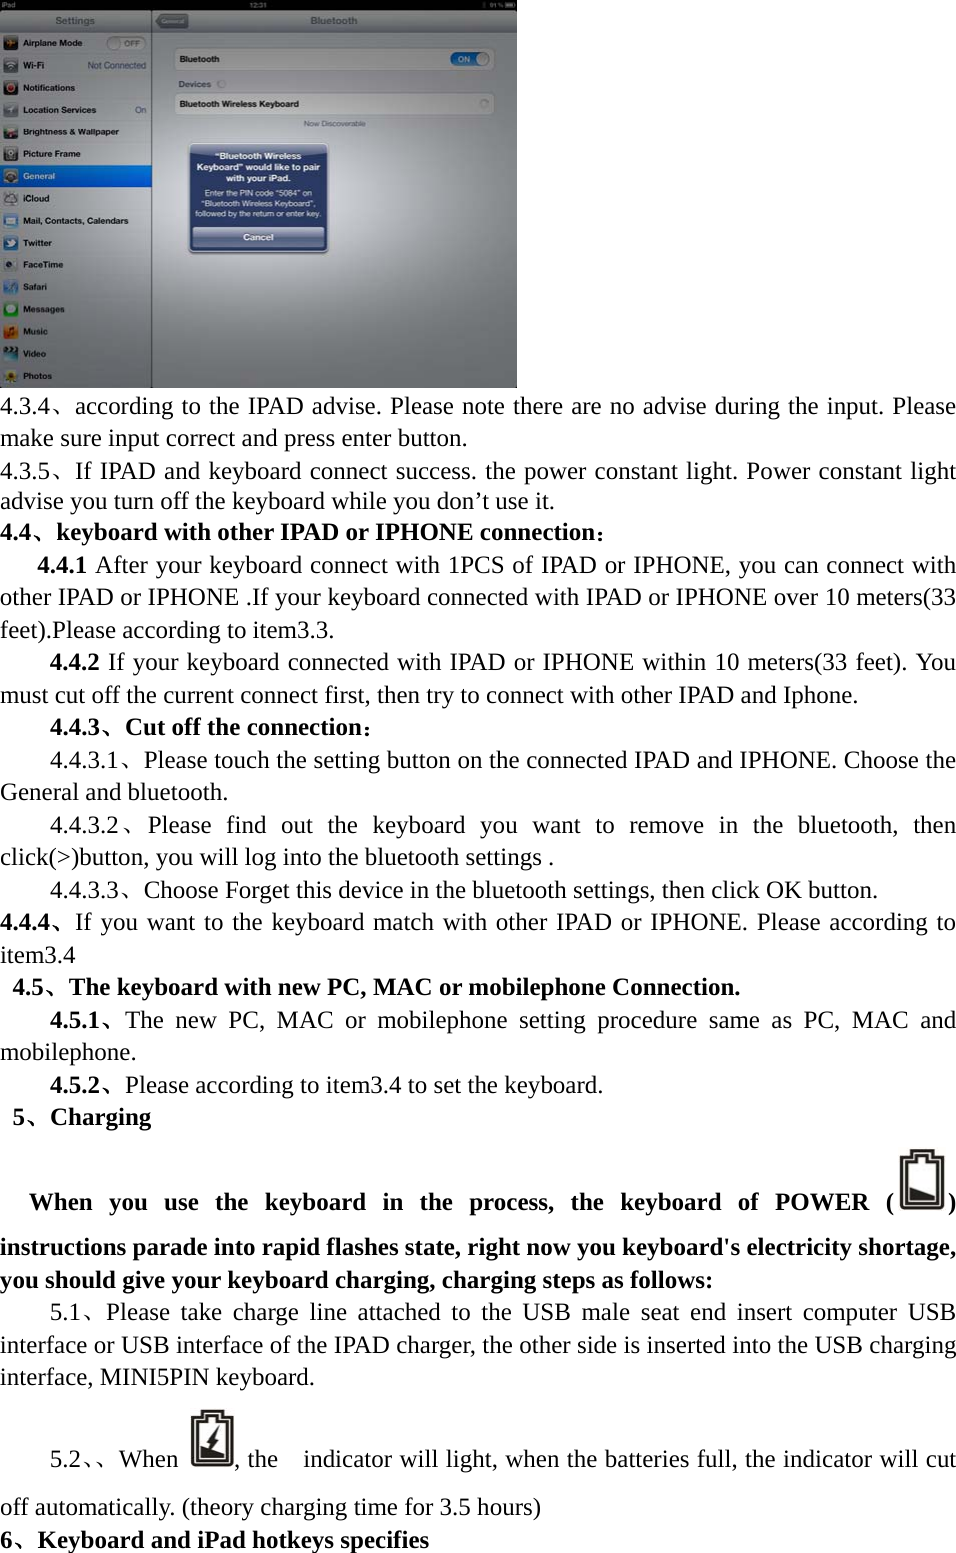   4.3.4、according to the IPAD advise. Please note there are no advise during the input. Please make sure input correct and press enter button. 4.3.5、If IPAD and keyboard connect success. the power constant light. Power constant light advise you turn off the keyboard while you don’t use it. 4.4、keyboard with other IPAD or IPHONE connection：    4.4.1 After your keyboard connect with 1PCS of IPAD or IPHONE, you can connect with other IPAD or IPHONE .If your keyboard connected with IPAD or IPHONE over 10 meters(33 feet).Please according to item3.3. 4.4.2 If your keyboard connected with IPAD or IPHONE within 10 meters(33 feet). You must cut off the current connect first, then try to connect with other IPAD and Iphone. 4.4.3、Cut off the connection： 4.4.3.1、Please touch the setting button on the connected IPAD and IPHONE. Choose the General and bluetooth. 4.4.3.2、Please find out the keyboard you want to remove in the bluetooth, then click(&gt;)button, you will log into the bluetooth settings . 4.4.3.3、Choose Forget this device in the bluetooth settings, then click OK button. 4.4.4、If you want to the keyboard match with other IPAD or IPHONE. Please according to item3.4  4.5、The keyboard with new PC, MAC or mobilephone Connection. 4.5.1、The new PC, MAC or mobilephone setting procedure same as PC, MAC and mobilephone. 4.5.2、Please according to item3.4 to set the keyboard.  5、Charging  When you use the keyboard in the process, the keyboard of POWER ( ) instructions parade into rapid flashes state, right now you keyboard&apos;s electricity shortage, you should give your keyboard charging, charging steps as follows:     5.1、Please take charge line attached to the USB male seat end insert computer USB interface or USB interface of the IPAD charger, the other side is inserted into the USB charging interface, MINI5PIN keyboard. 5.2、、When  , the    indicator will light, when the batteries full, the indicator will cut off automatically. (theory charging time for 3.5 hours) 6、Keyboard and iPad hotkeys specifies 